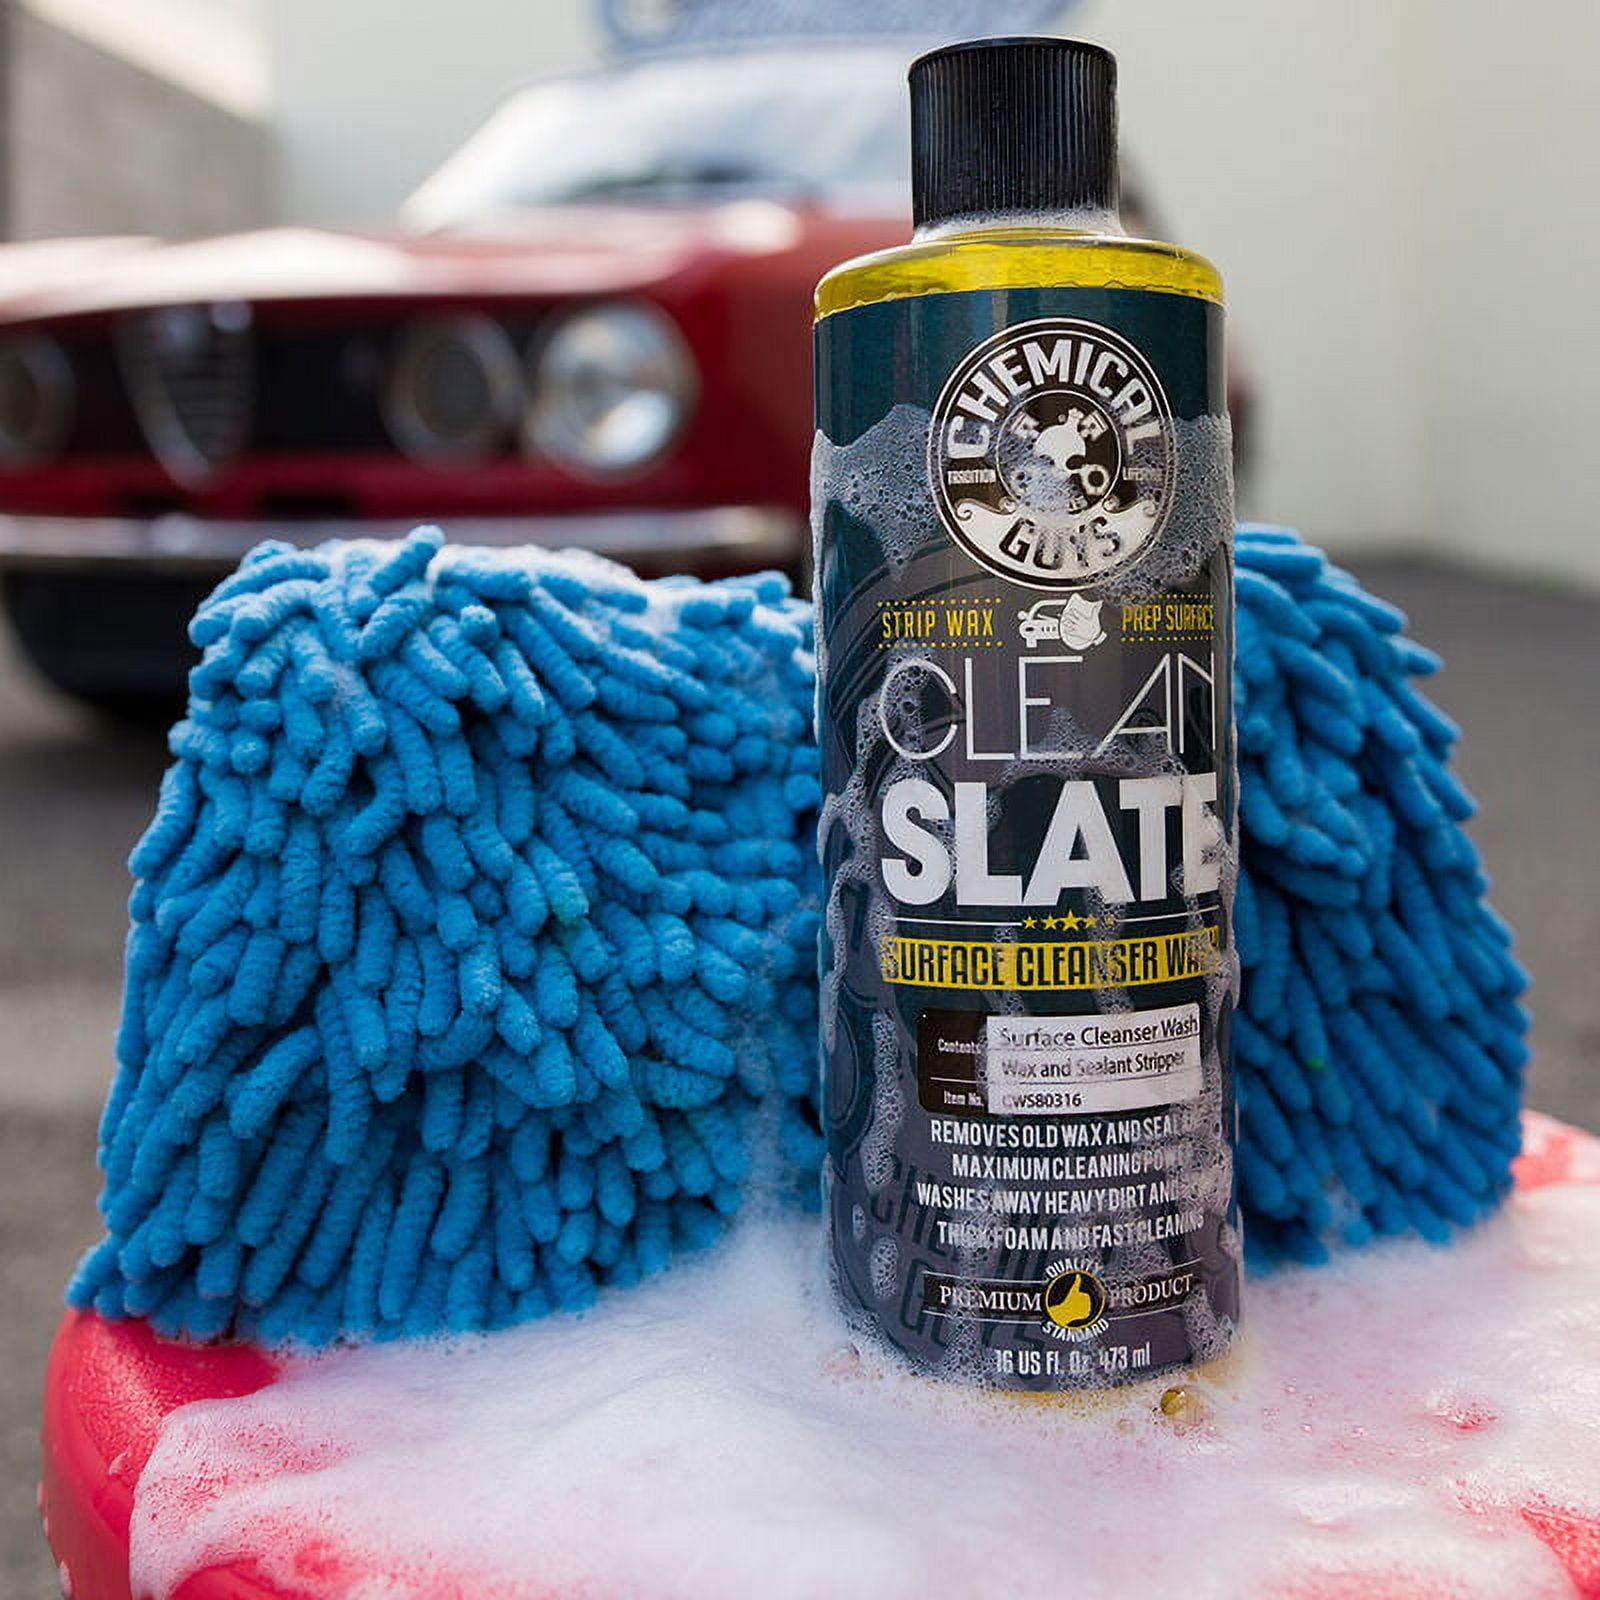 Chemical Guys Clean Slate Test and Review 